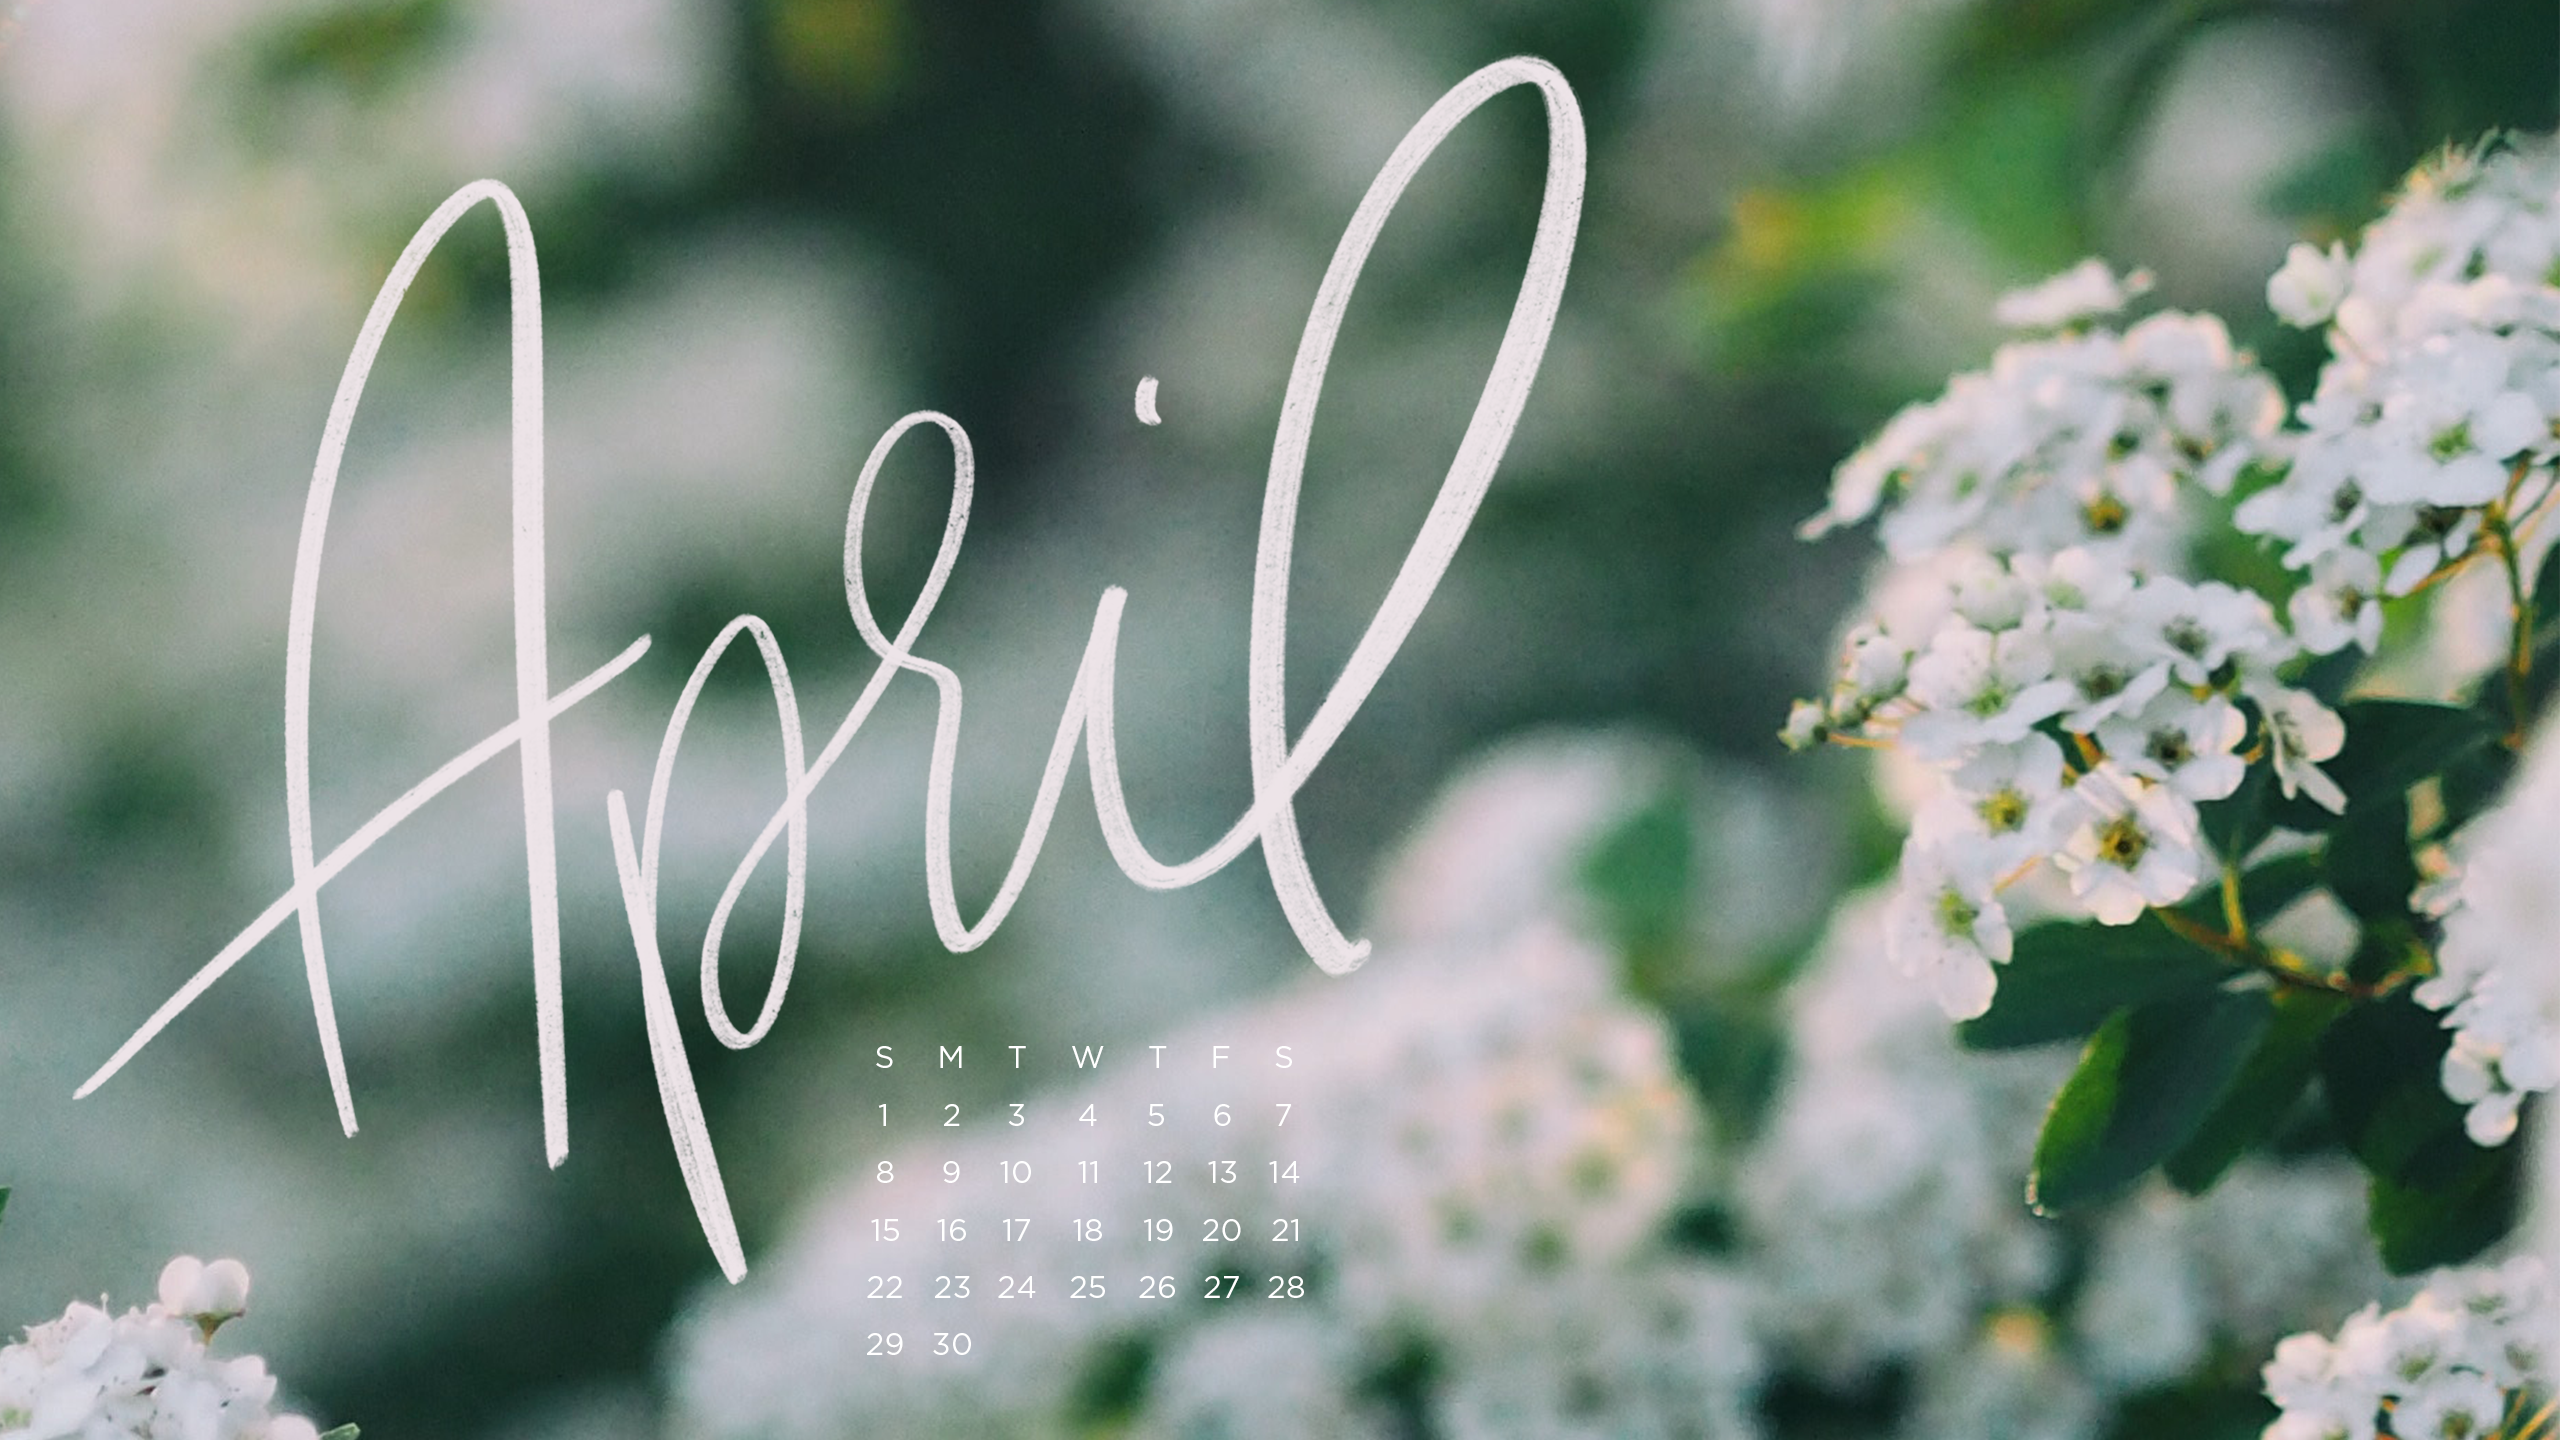 Free, Downloadable Tech Background for April!